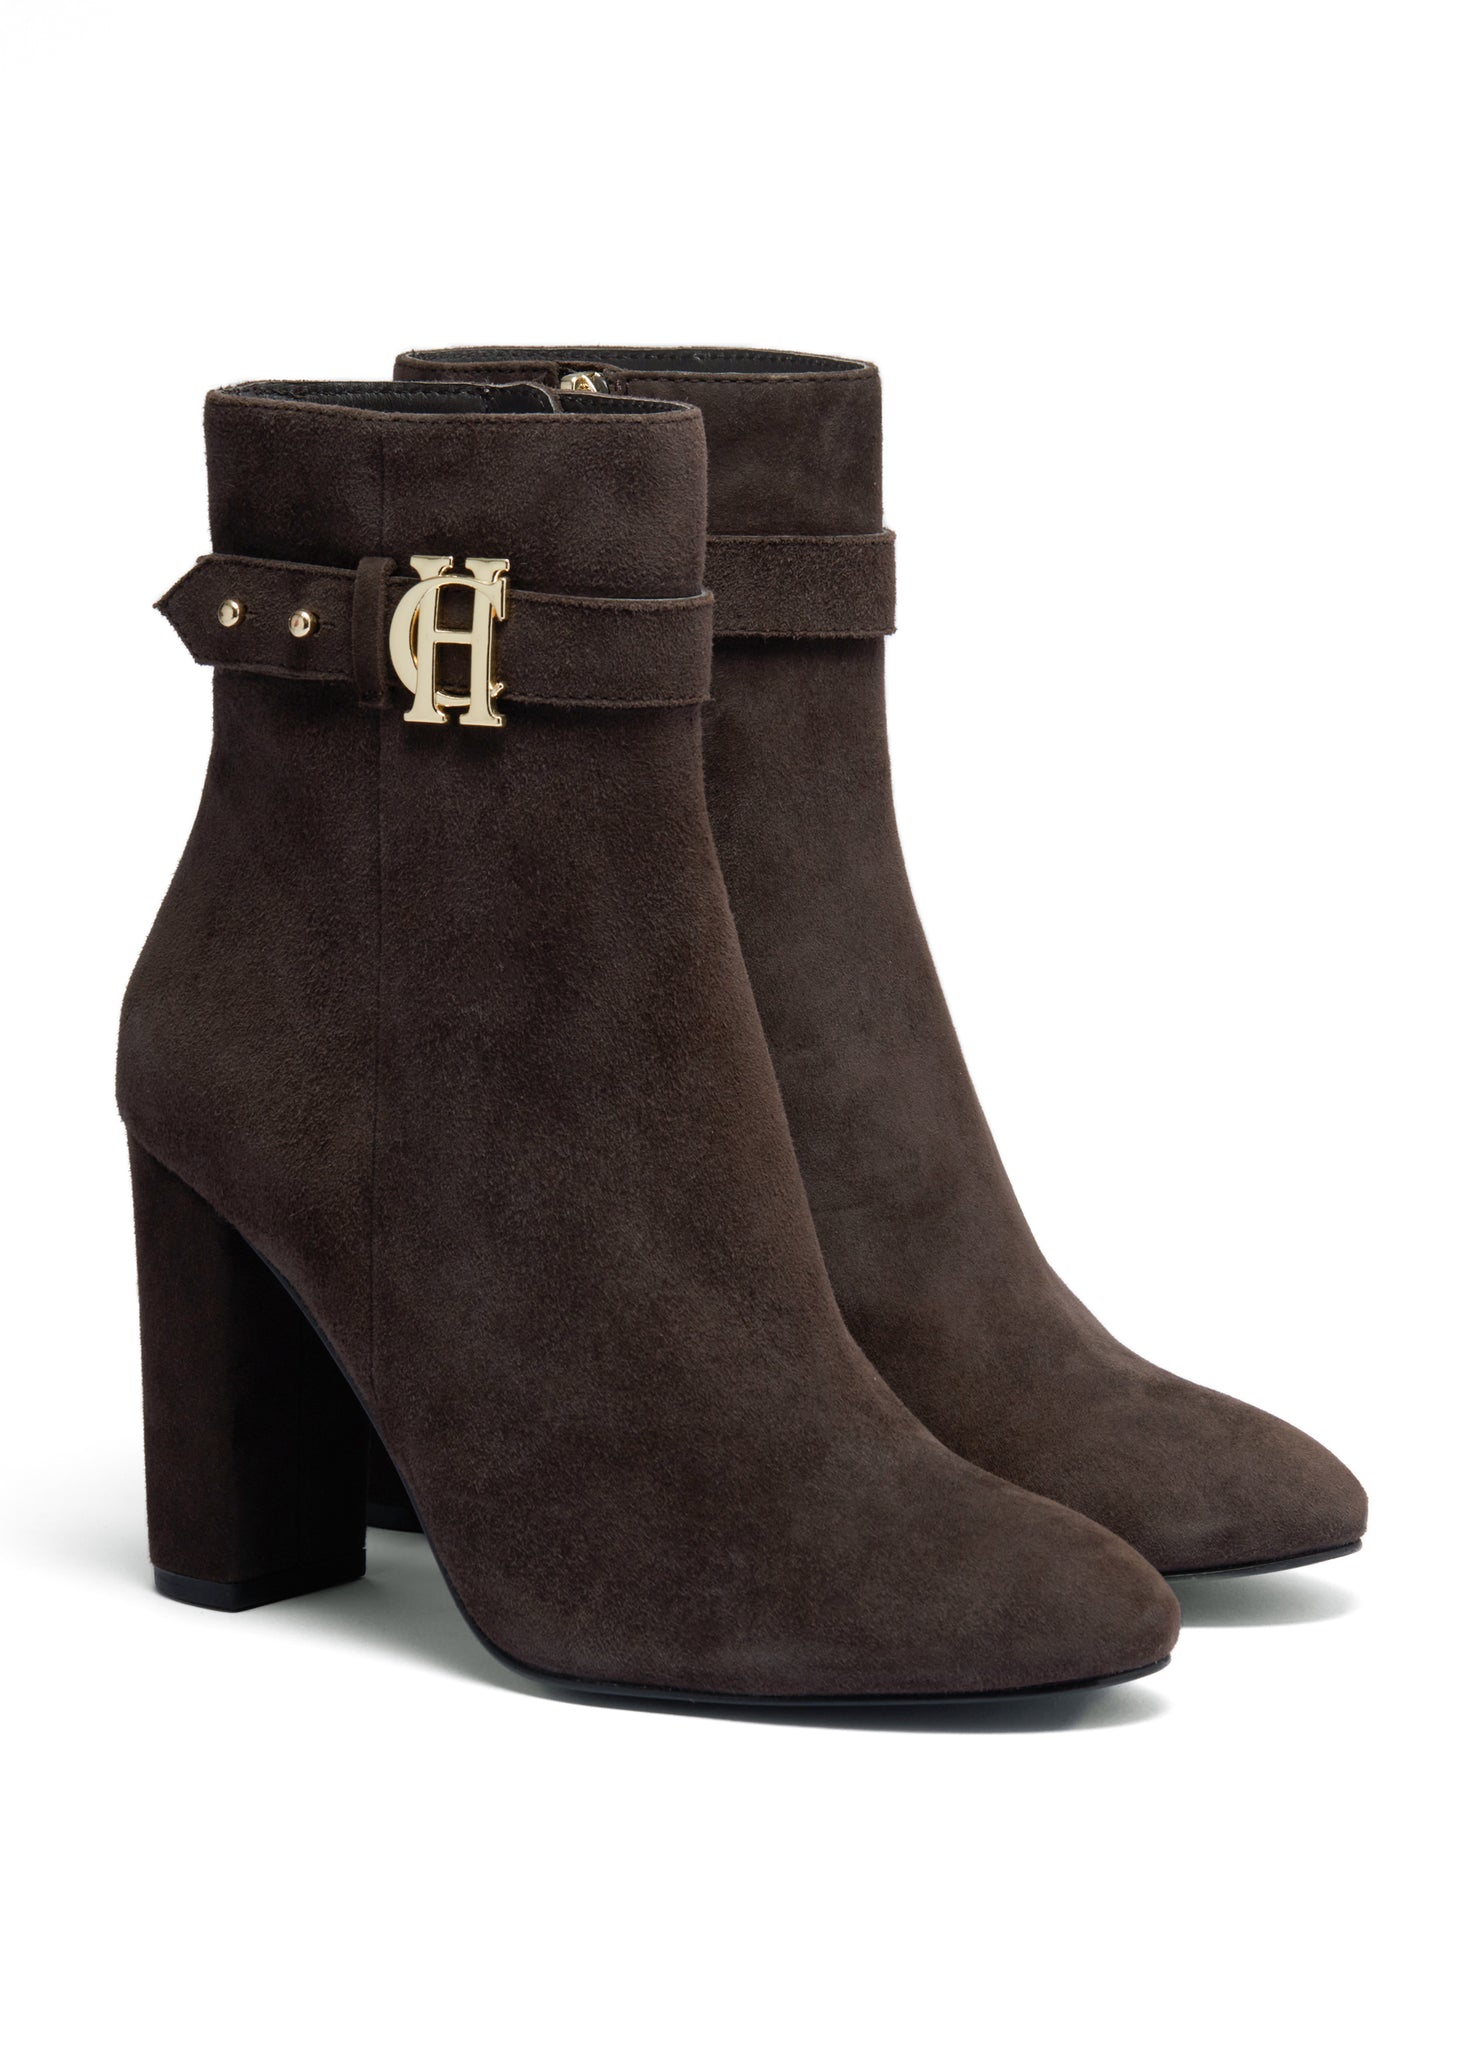 Mayfair Suede Ankle Boot (Chocolate)